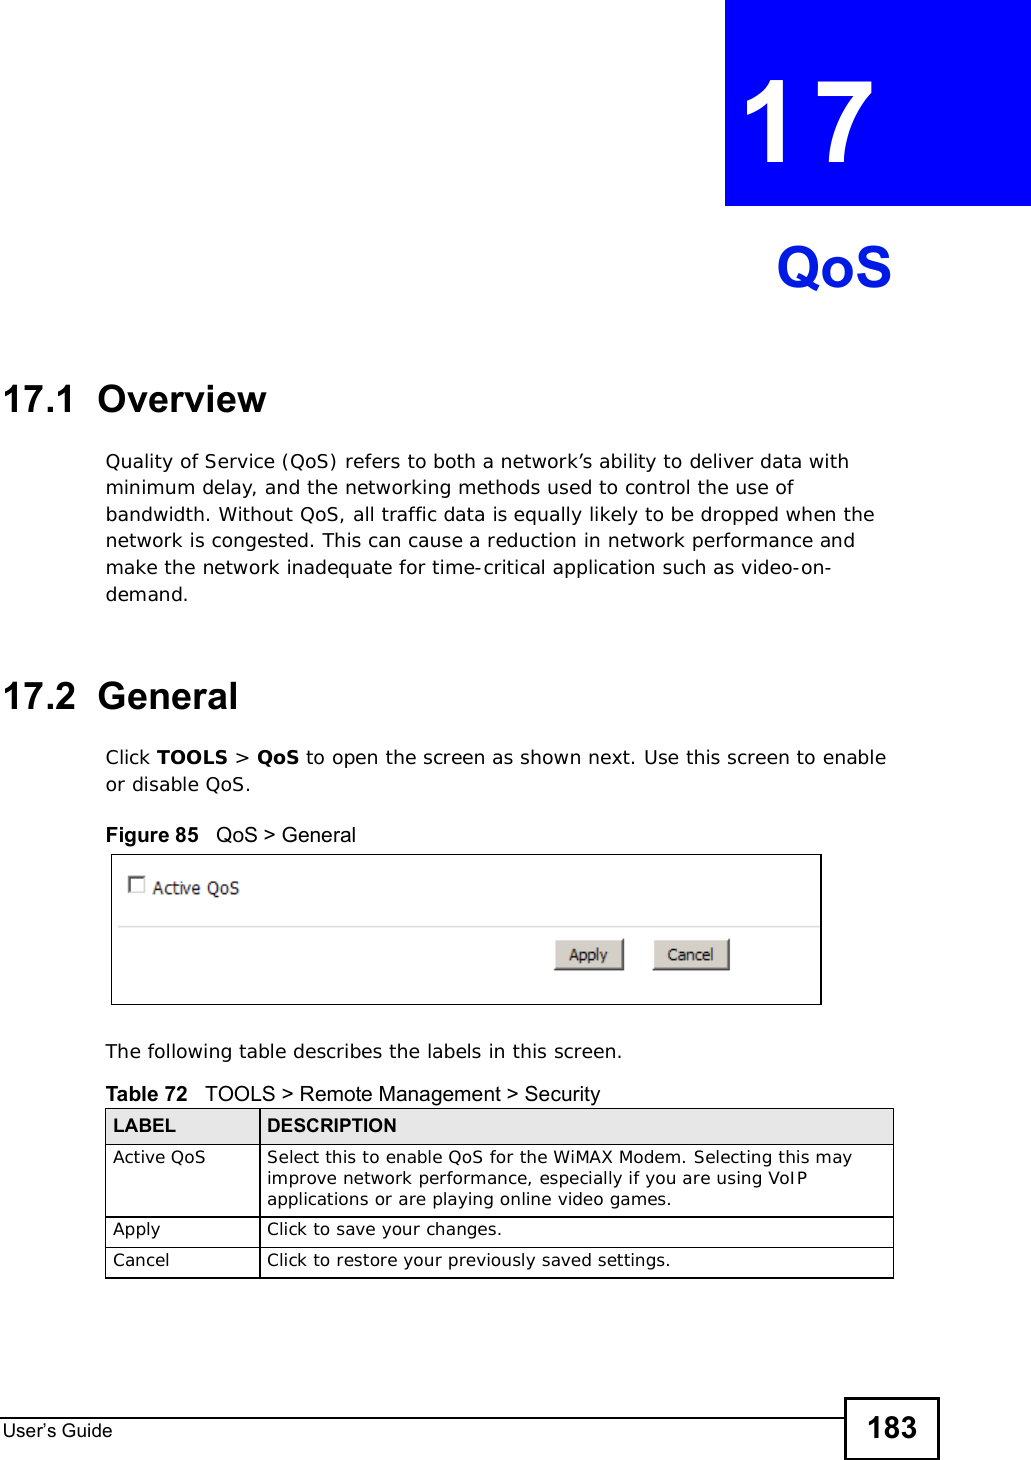 User s Guide 183CHAPTER 17QoS17.1  OverviewQuality of Service (QoS) refers to both a network’s ability to deliver data with minimum delay, and the networking methods used to control the use of bandwidth. Without QoS, all traffic data is equally likely to be dropped when the network is congested. This can cause a reduction in network performance and make the network inadequate for time-critical application such as video-on-demand.17.2  GeneralClick TOOLS &gt; QoS to open the screen as shown next. Use this screen to enable or disable QoS.Figure 85   QoS &gt; GeneralThe following table describes the labels in this screen.Table 72   TOOLS &gt; Remote Management &gt; SecurityLABEL DESCRIPTIONActive QoS Select this to enable QoS for the WiMAX Modem. Selecting this may improve network performance, especially if you are using VoIP applications or are playing online video games.Apply Click to save your changes.Cancel Click to restore your previously saved settings.